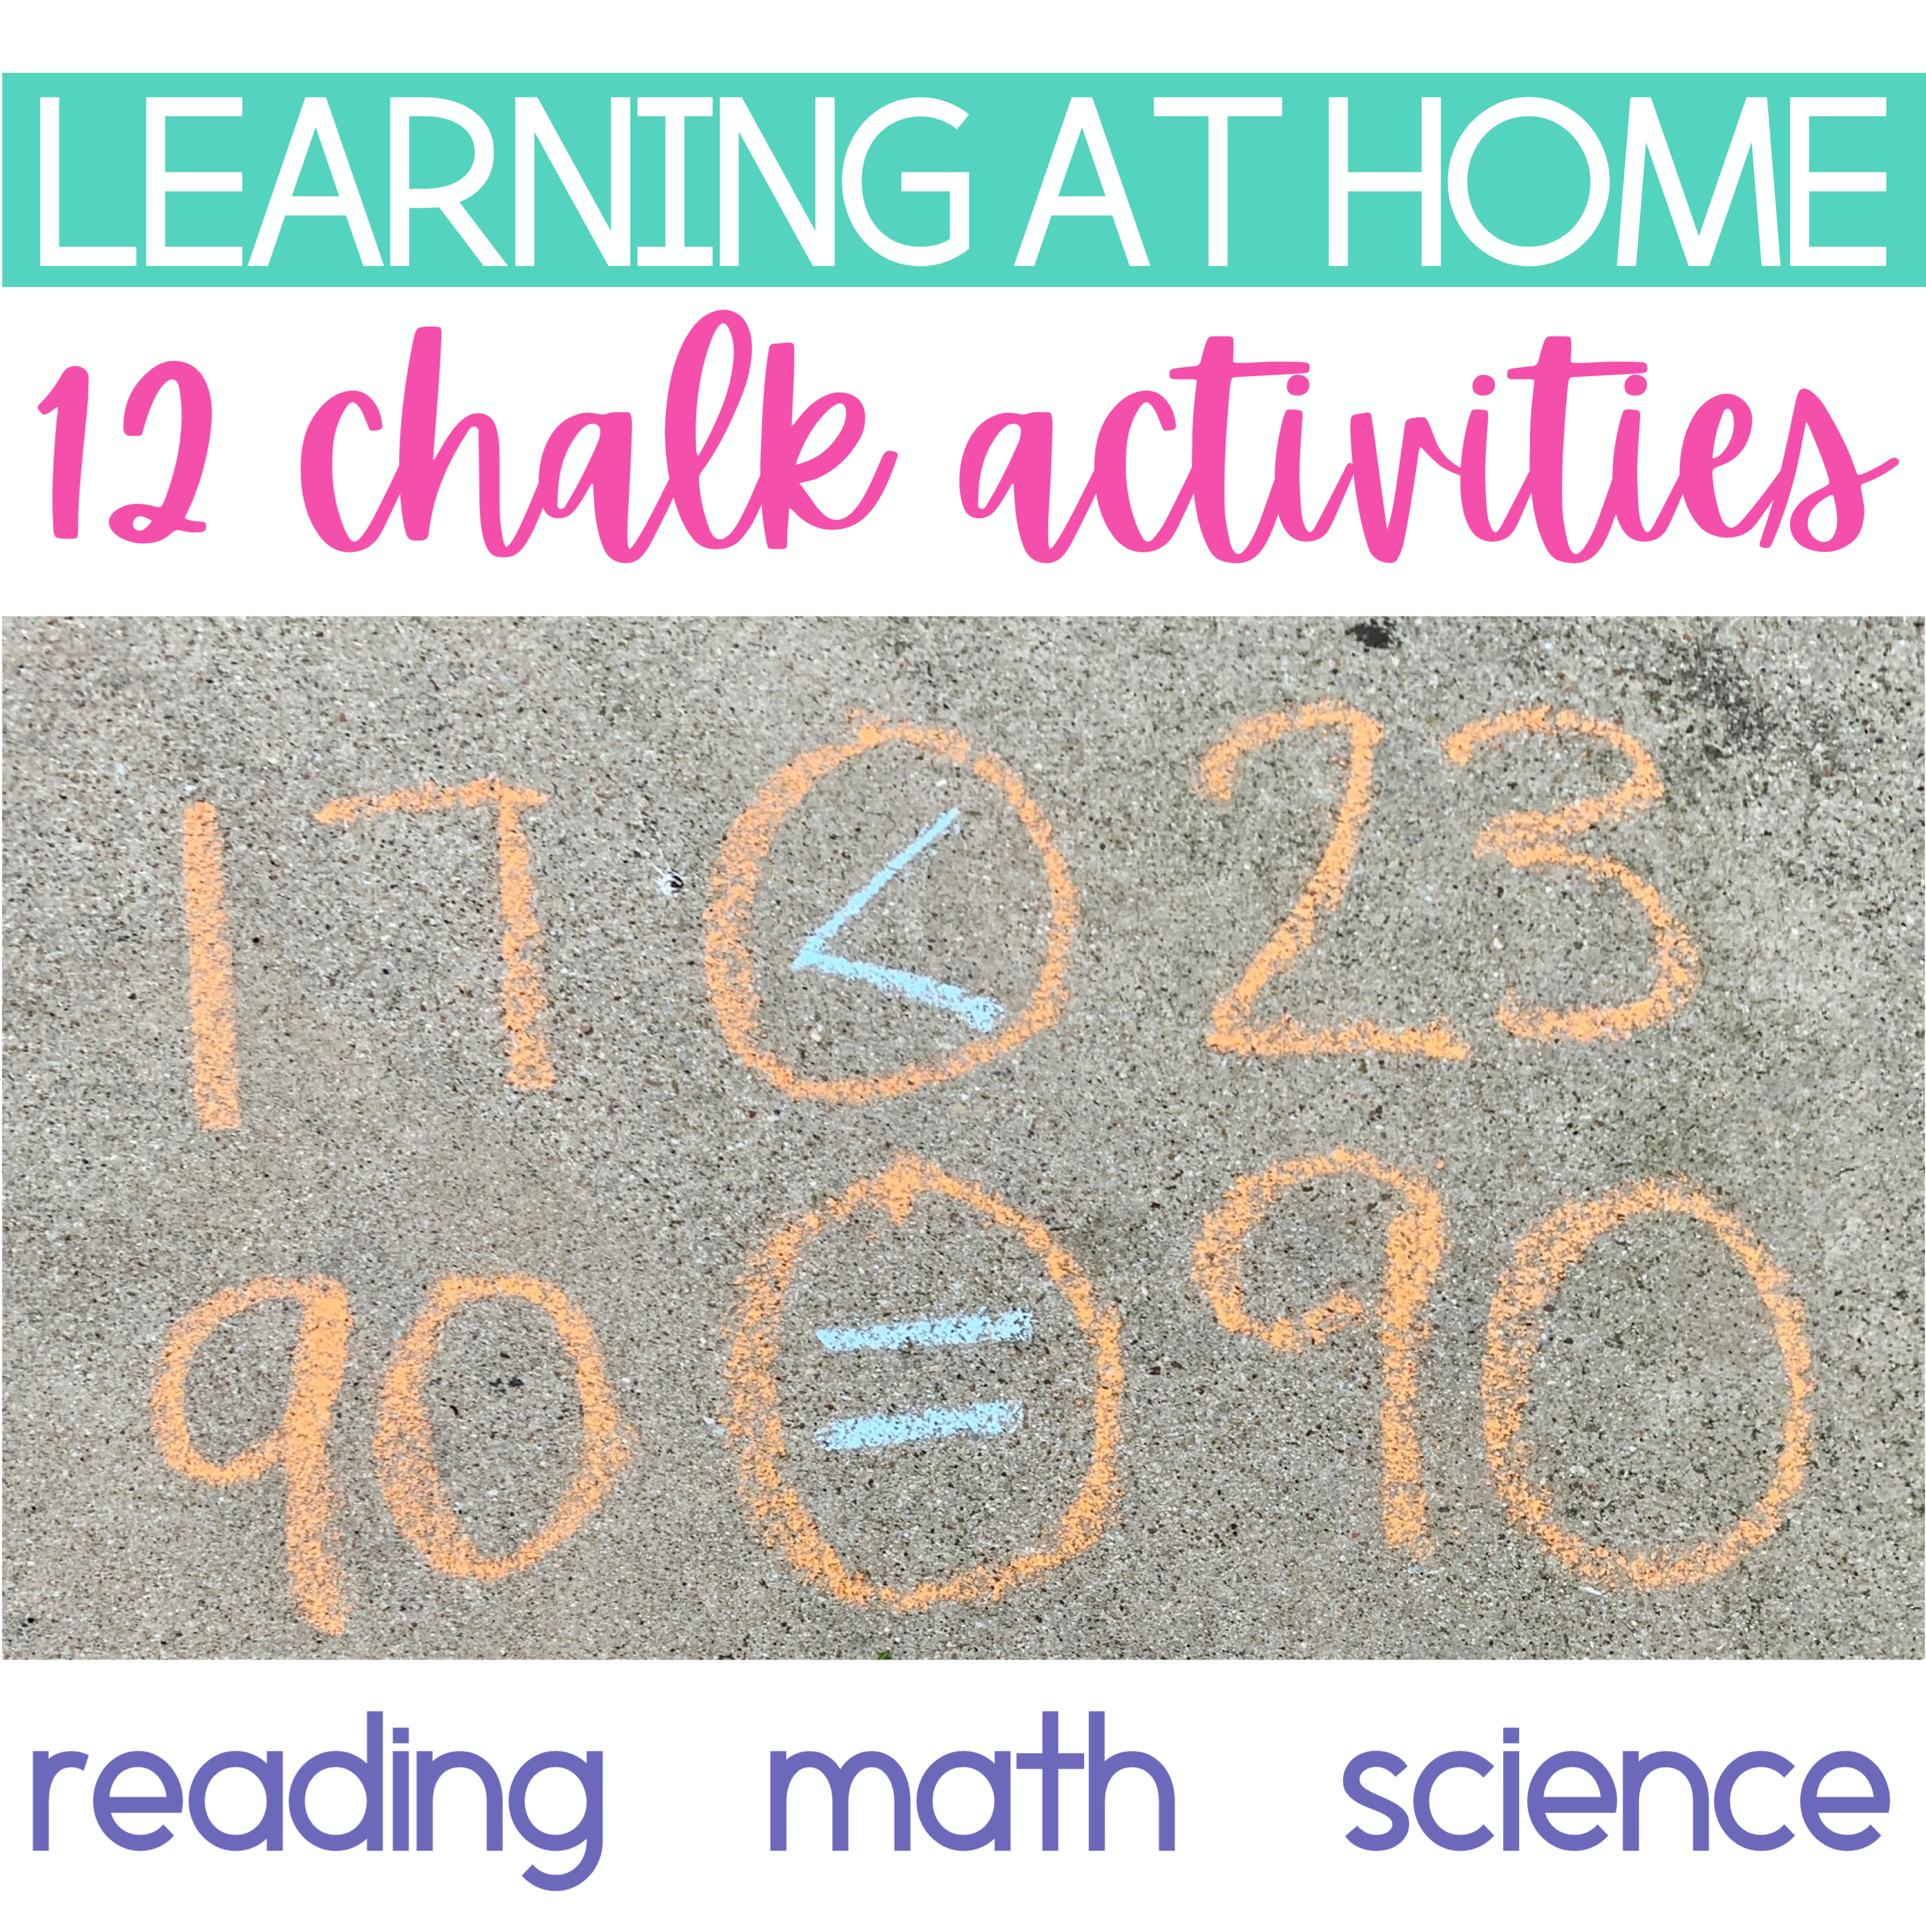 Kitchen Floor Chalk- Learning Letters and Numbers - How To Run A